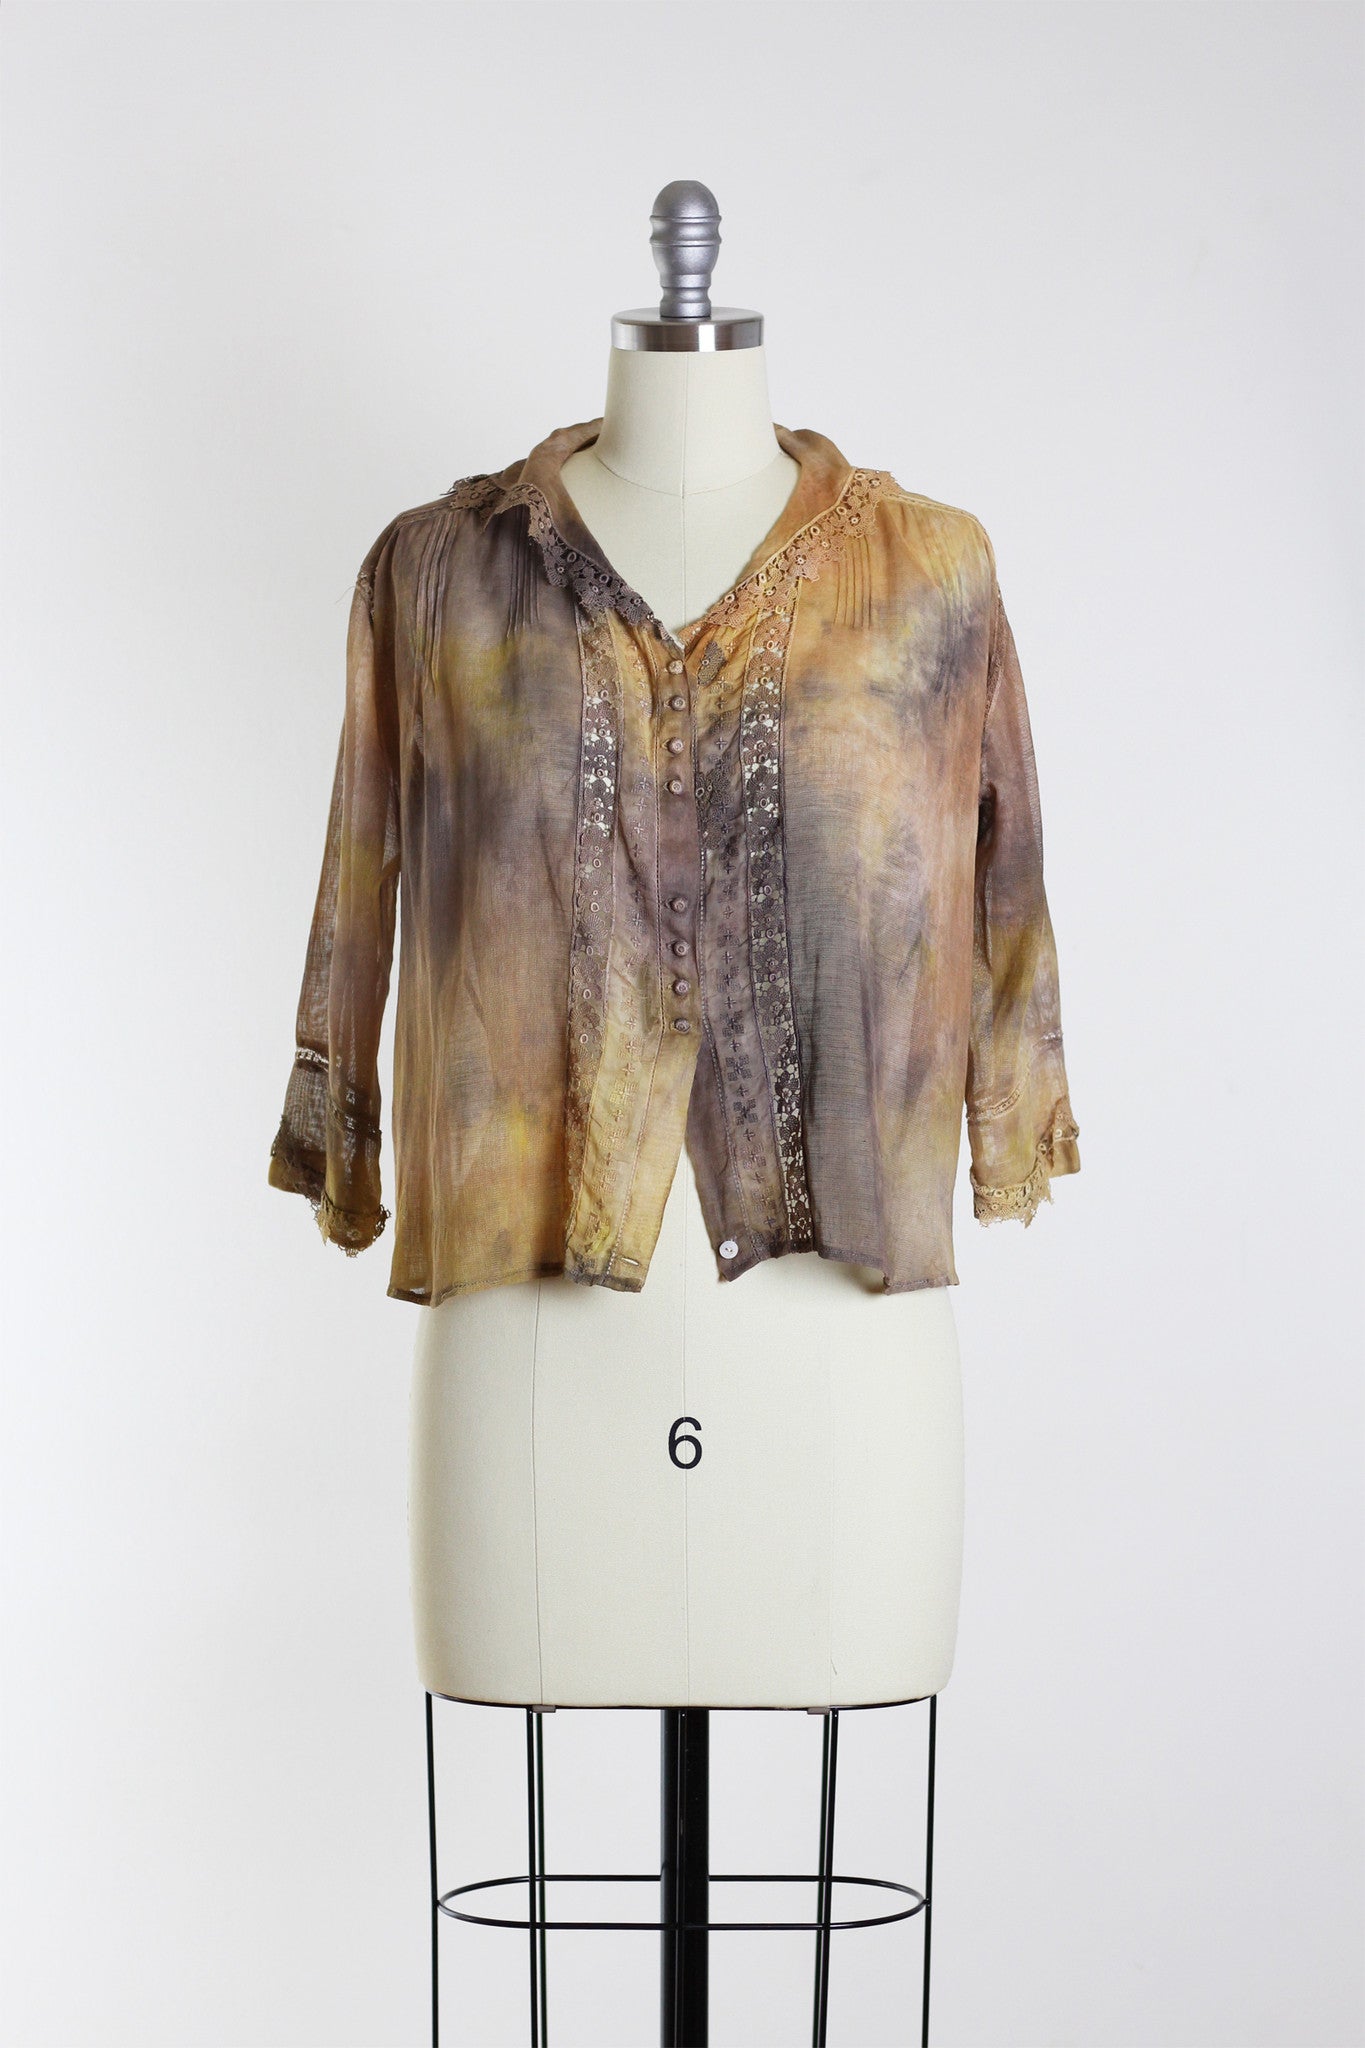 Tie-Dyed Edwardian Linen & Lace Top in Yellow & Grey